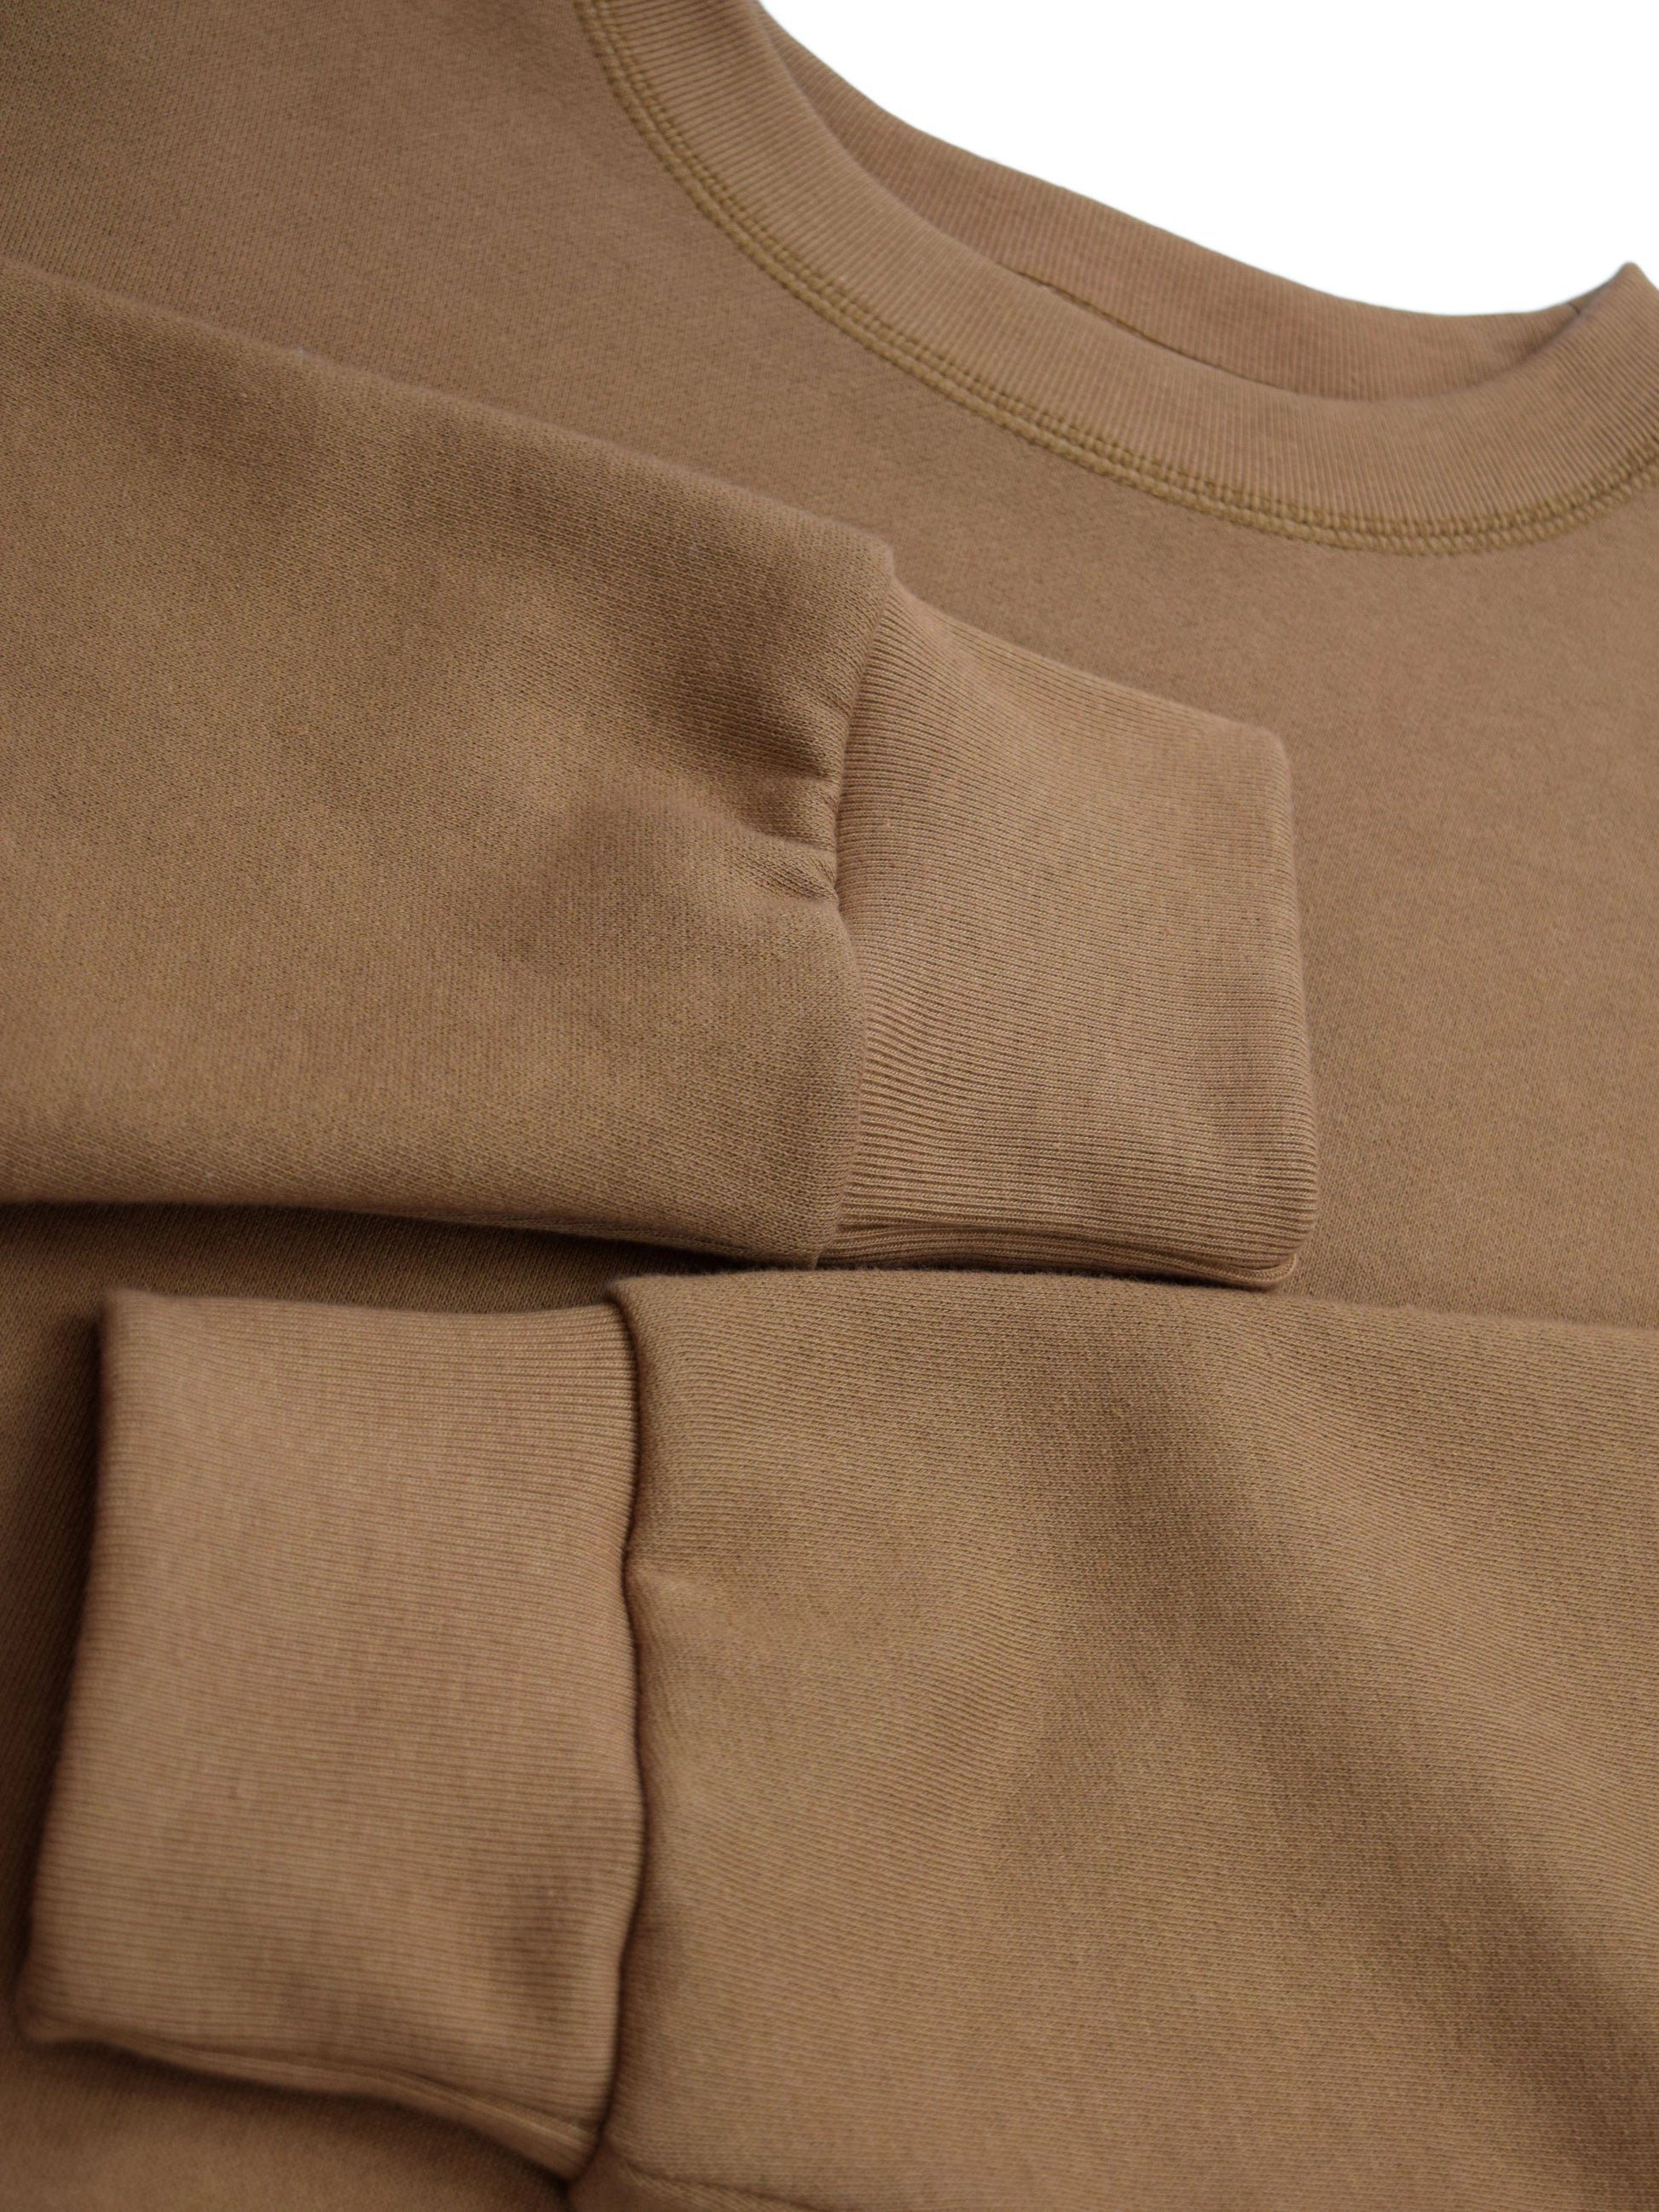 Sleeves folded over middle of sweater, close-up of fitted cuffs